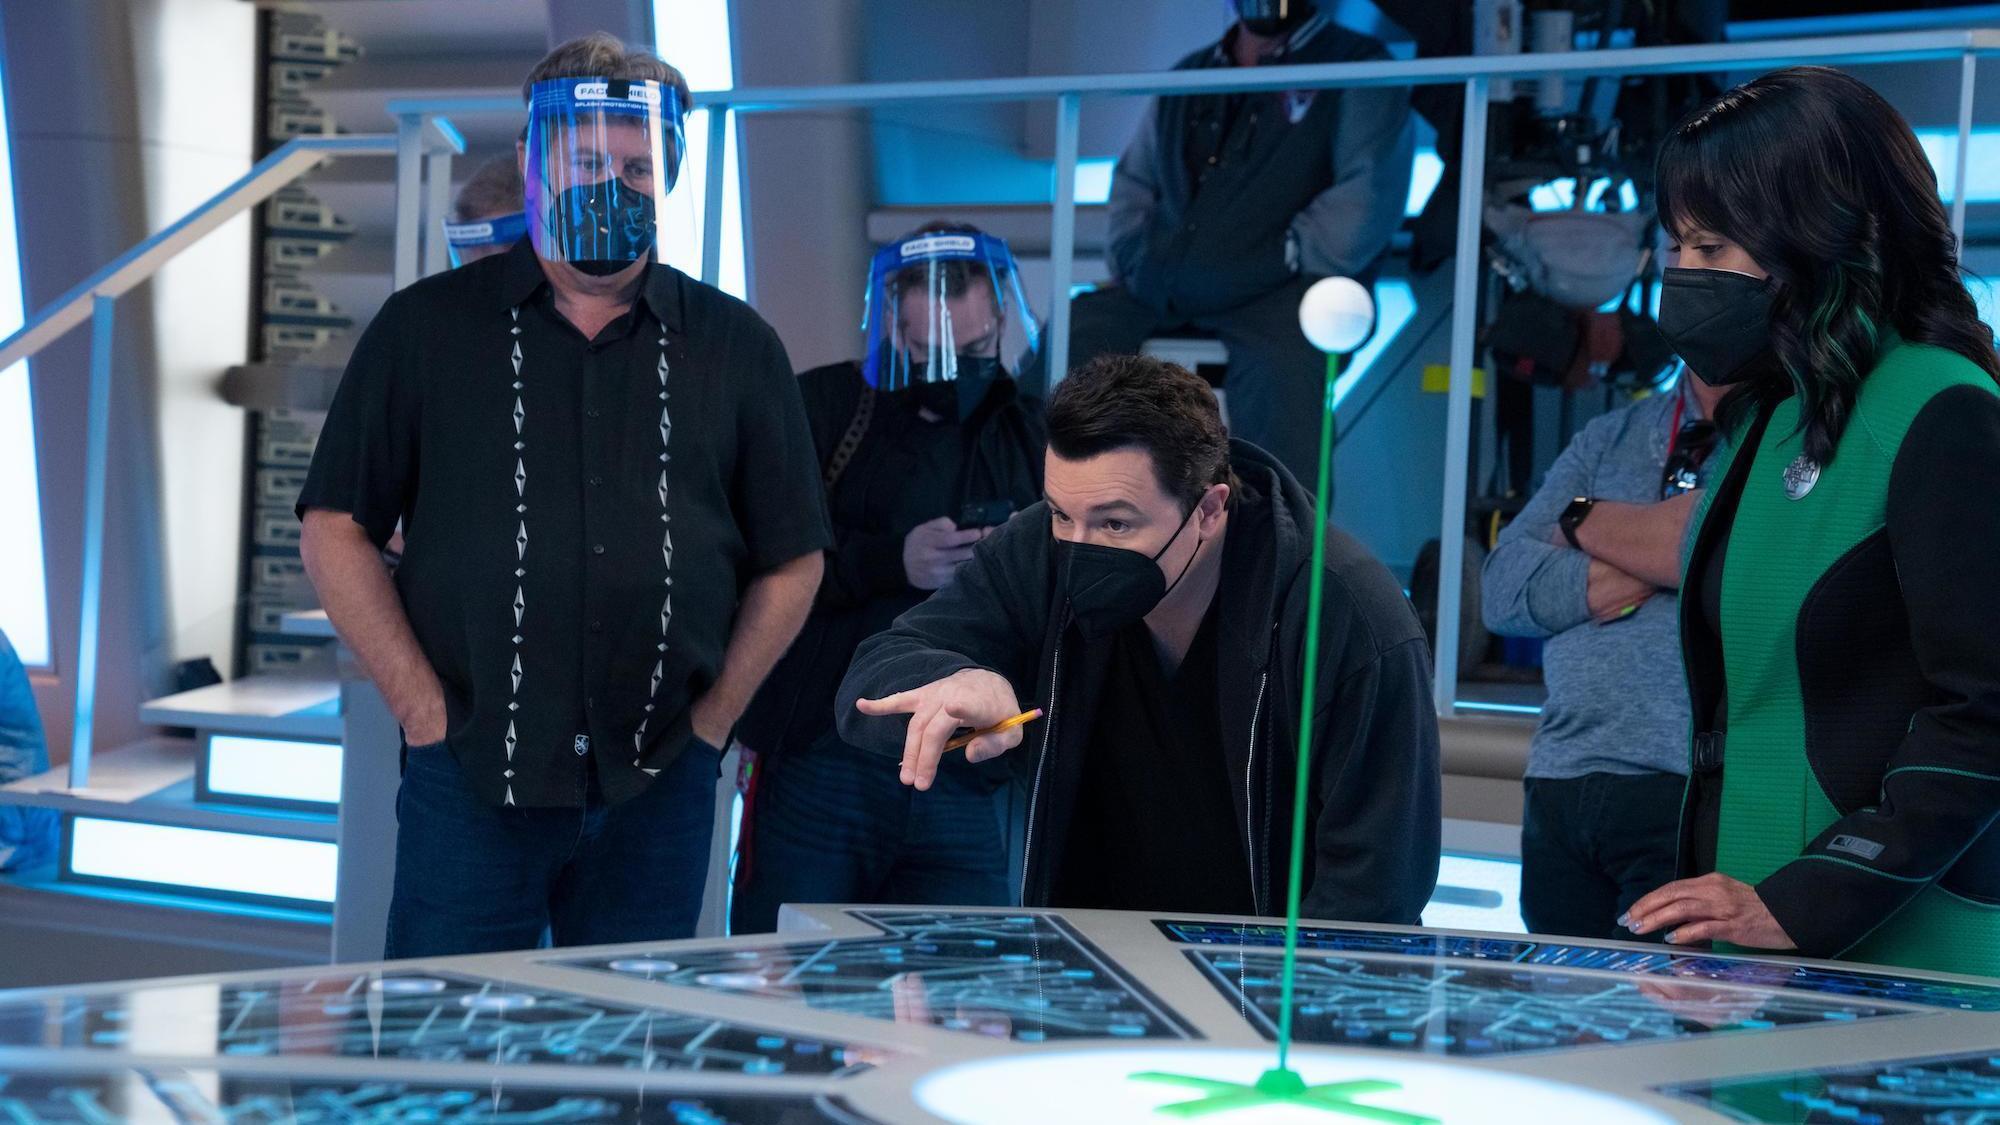 The Orville: New Horizons -- “From Unknown Graves” - Episode 307 -- The Orville discovers a Kaylon with a very special ability. Capt. Ed Mercer (Seth MacFarlane), and Dr. Claire Finn (Penny Johnson Jerald), shown. (Photo by: Greg Gayne/Hulu)